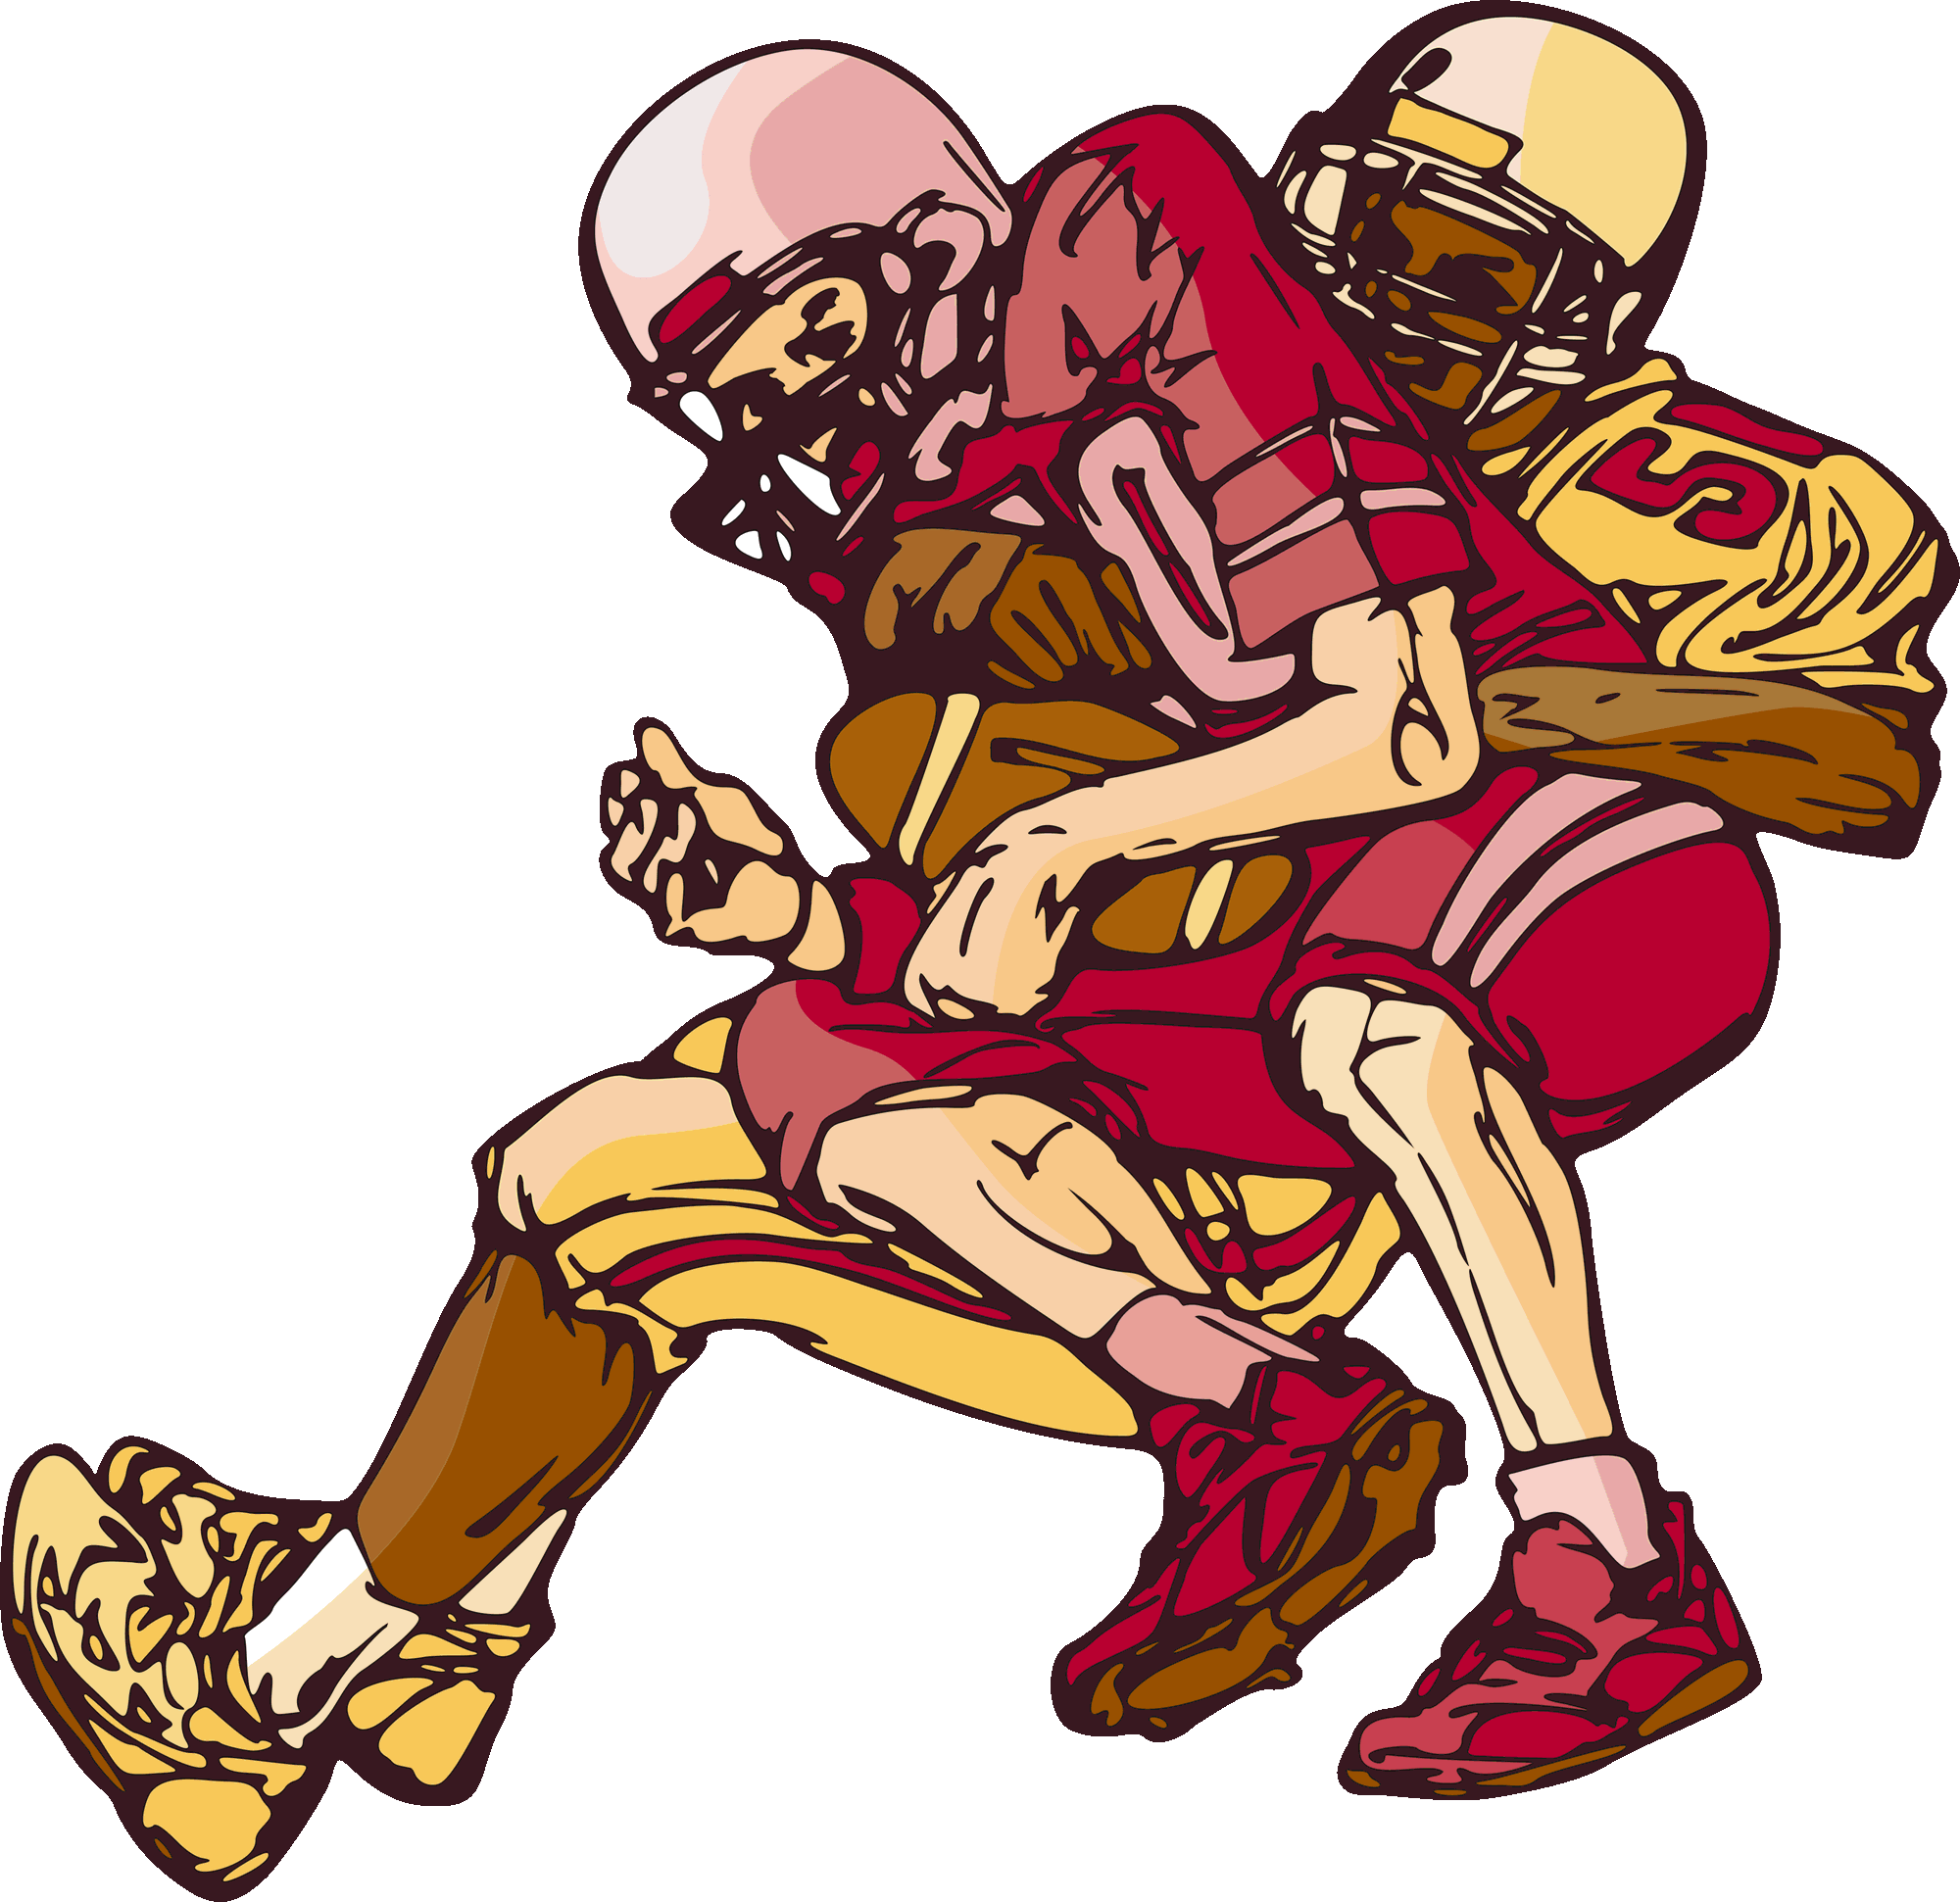 free clipart images football player - photo #35